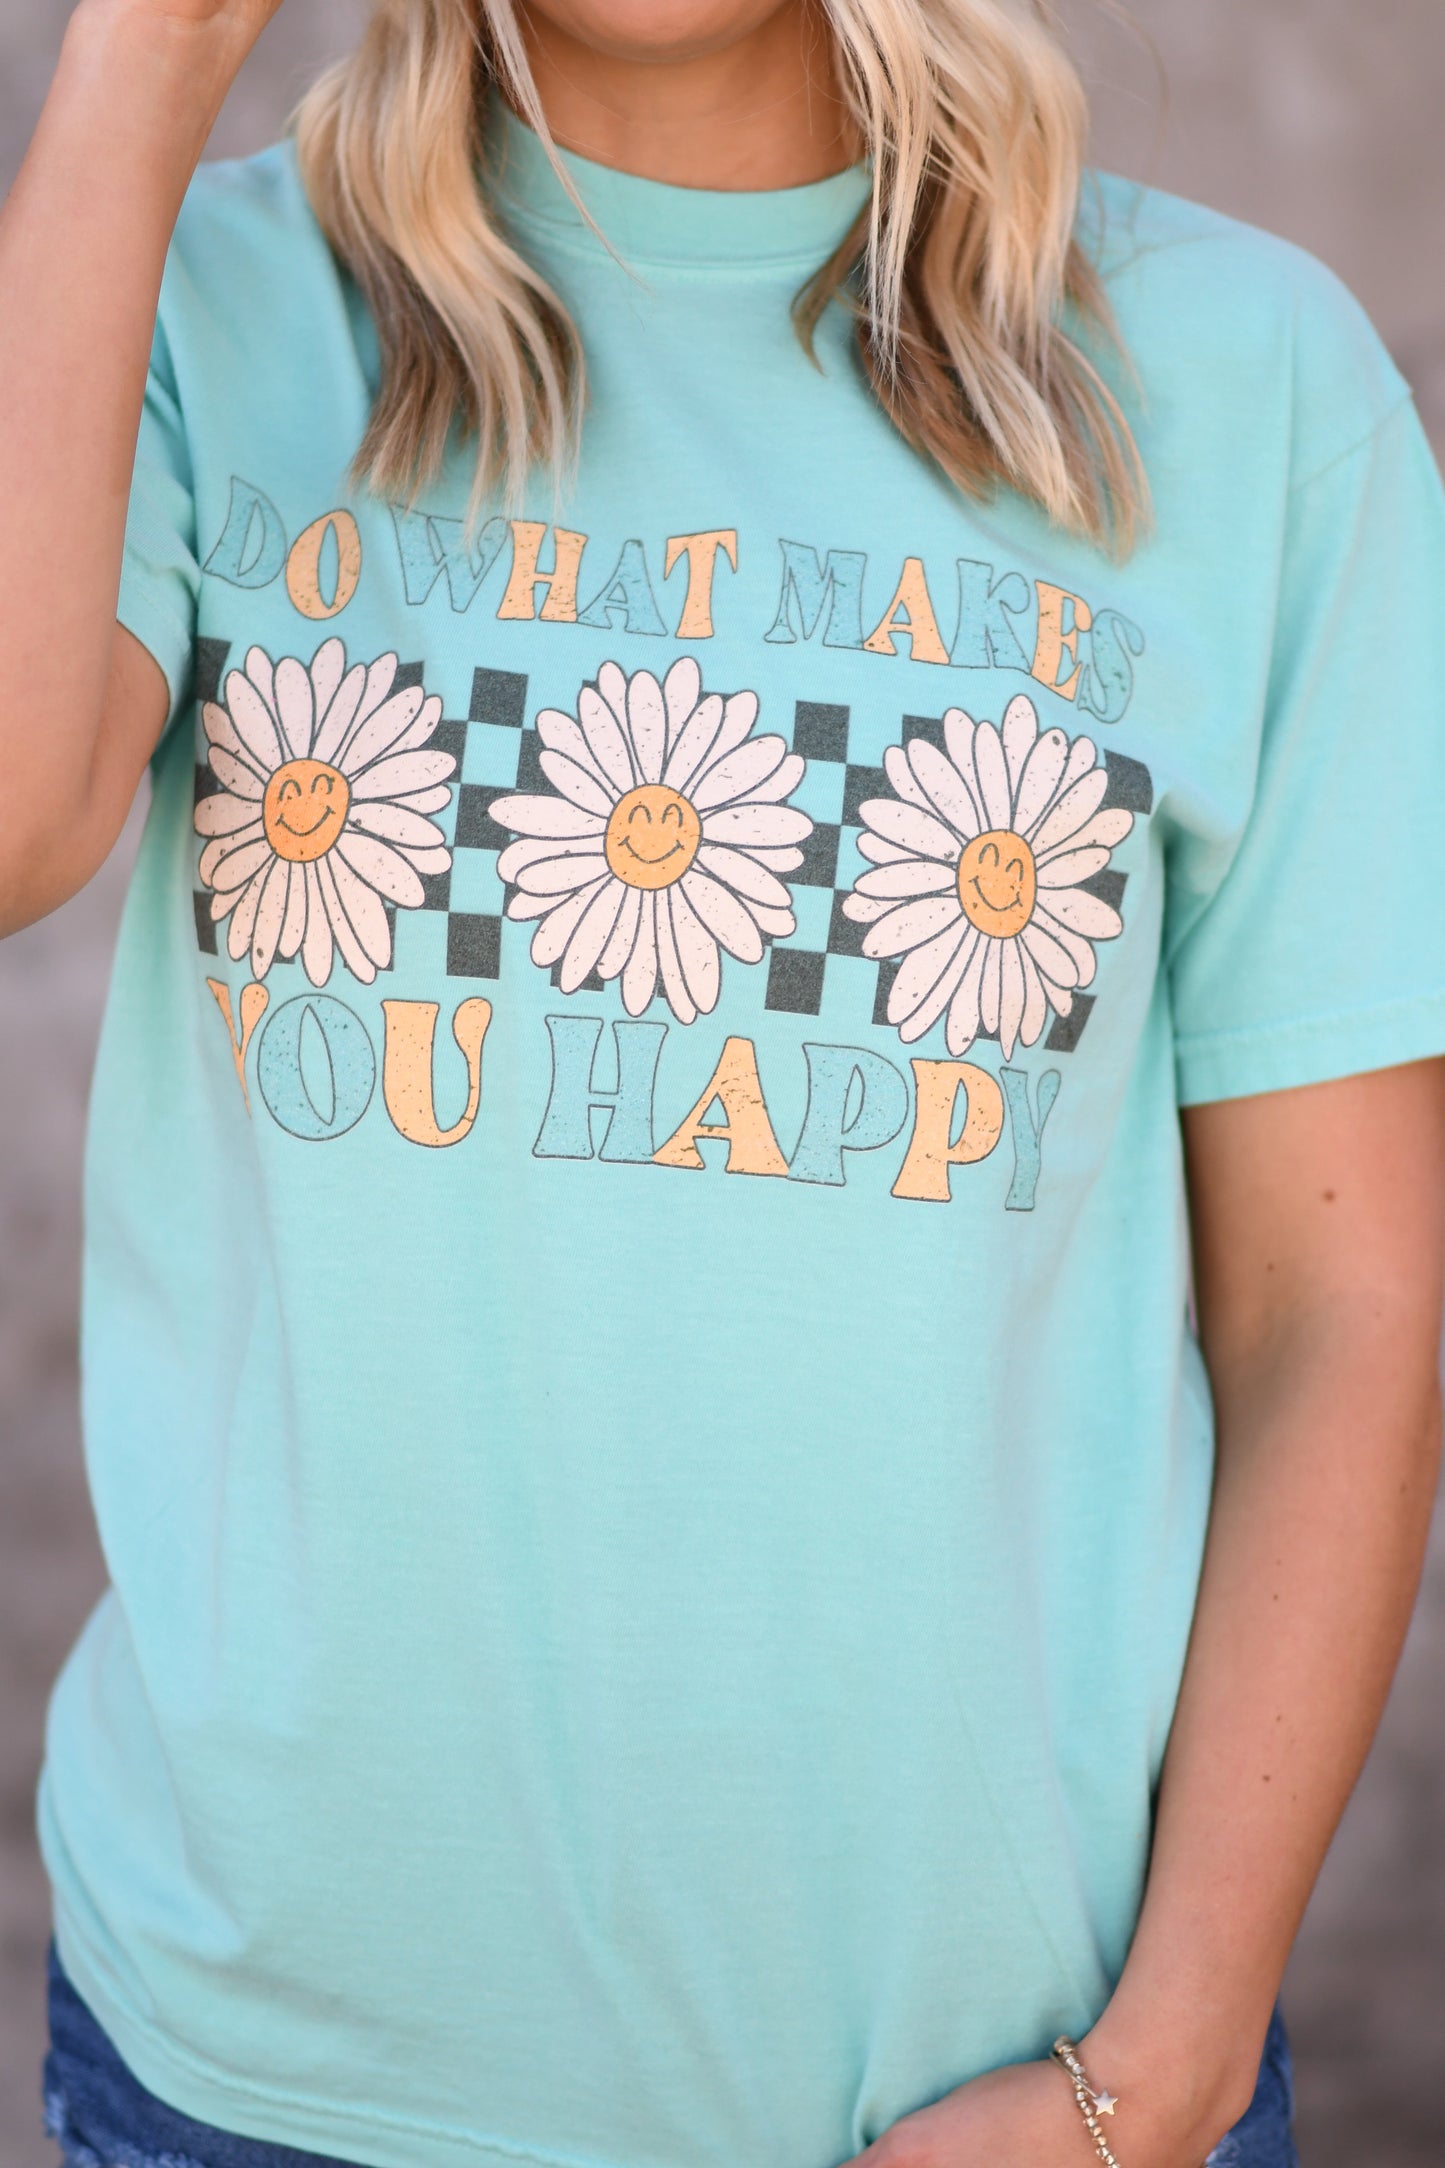 Do What Makes You Happy Daisy graphic tee